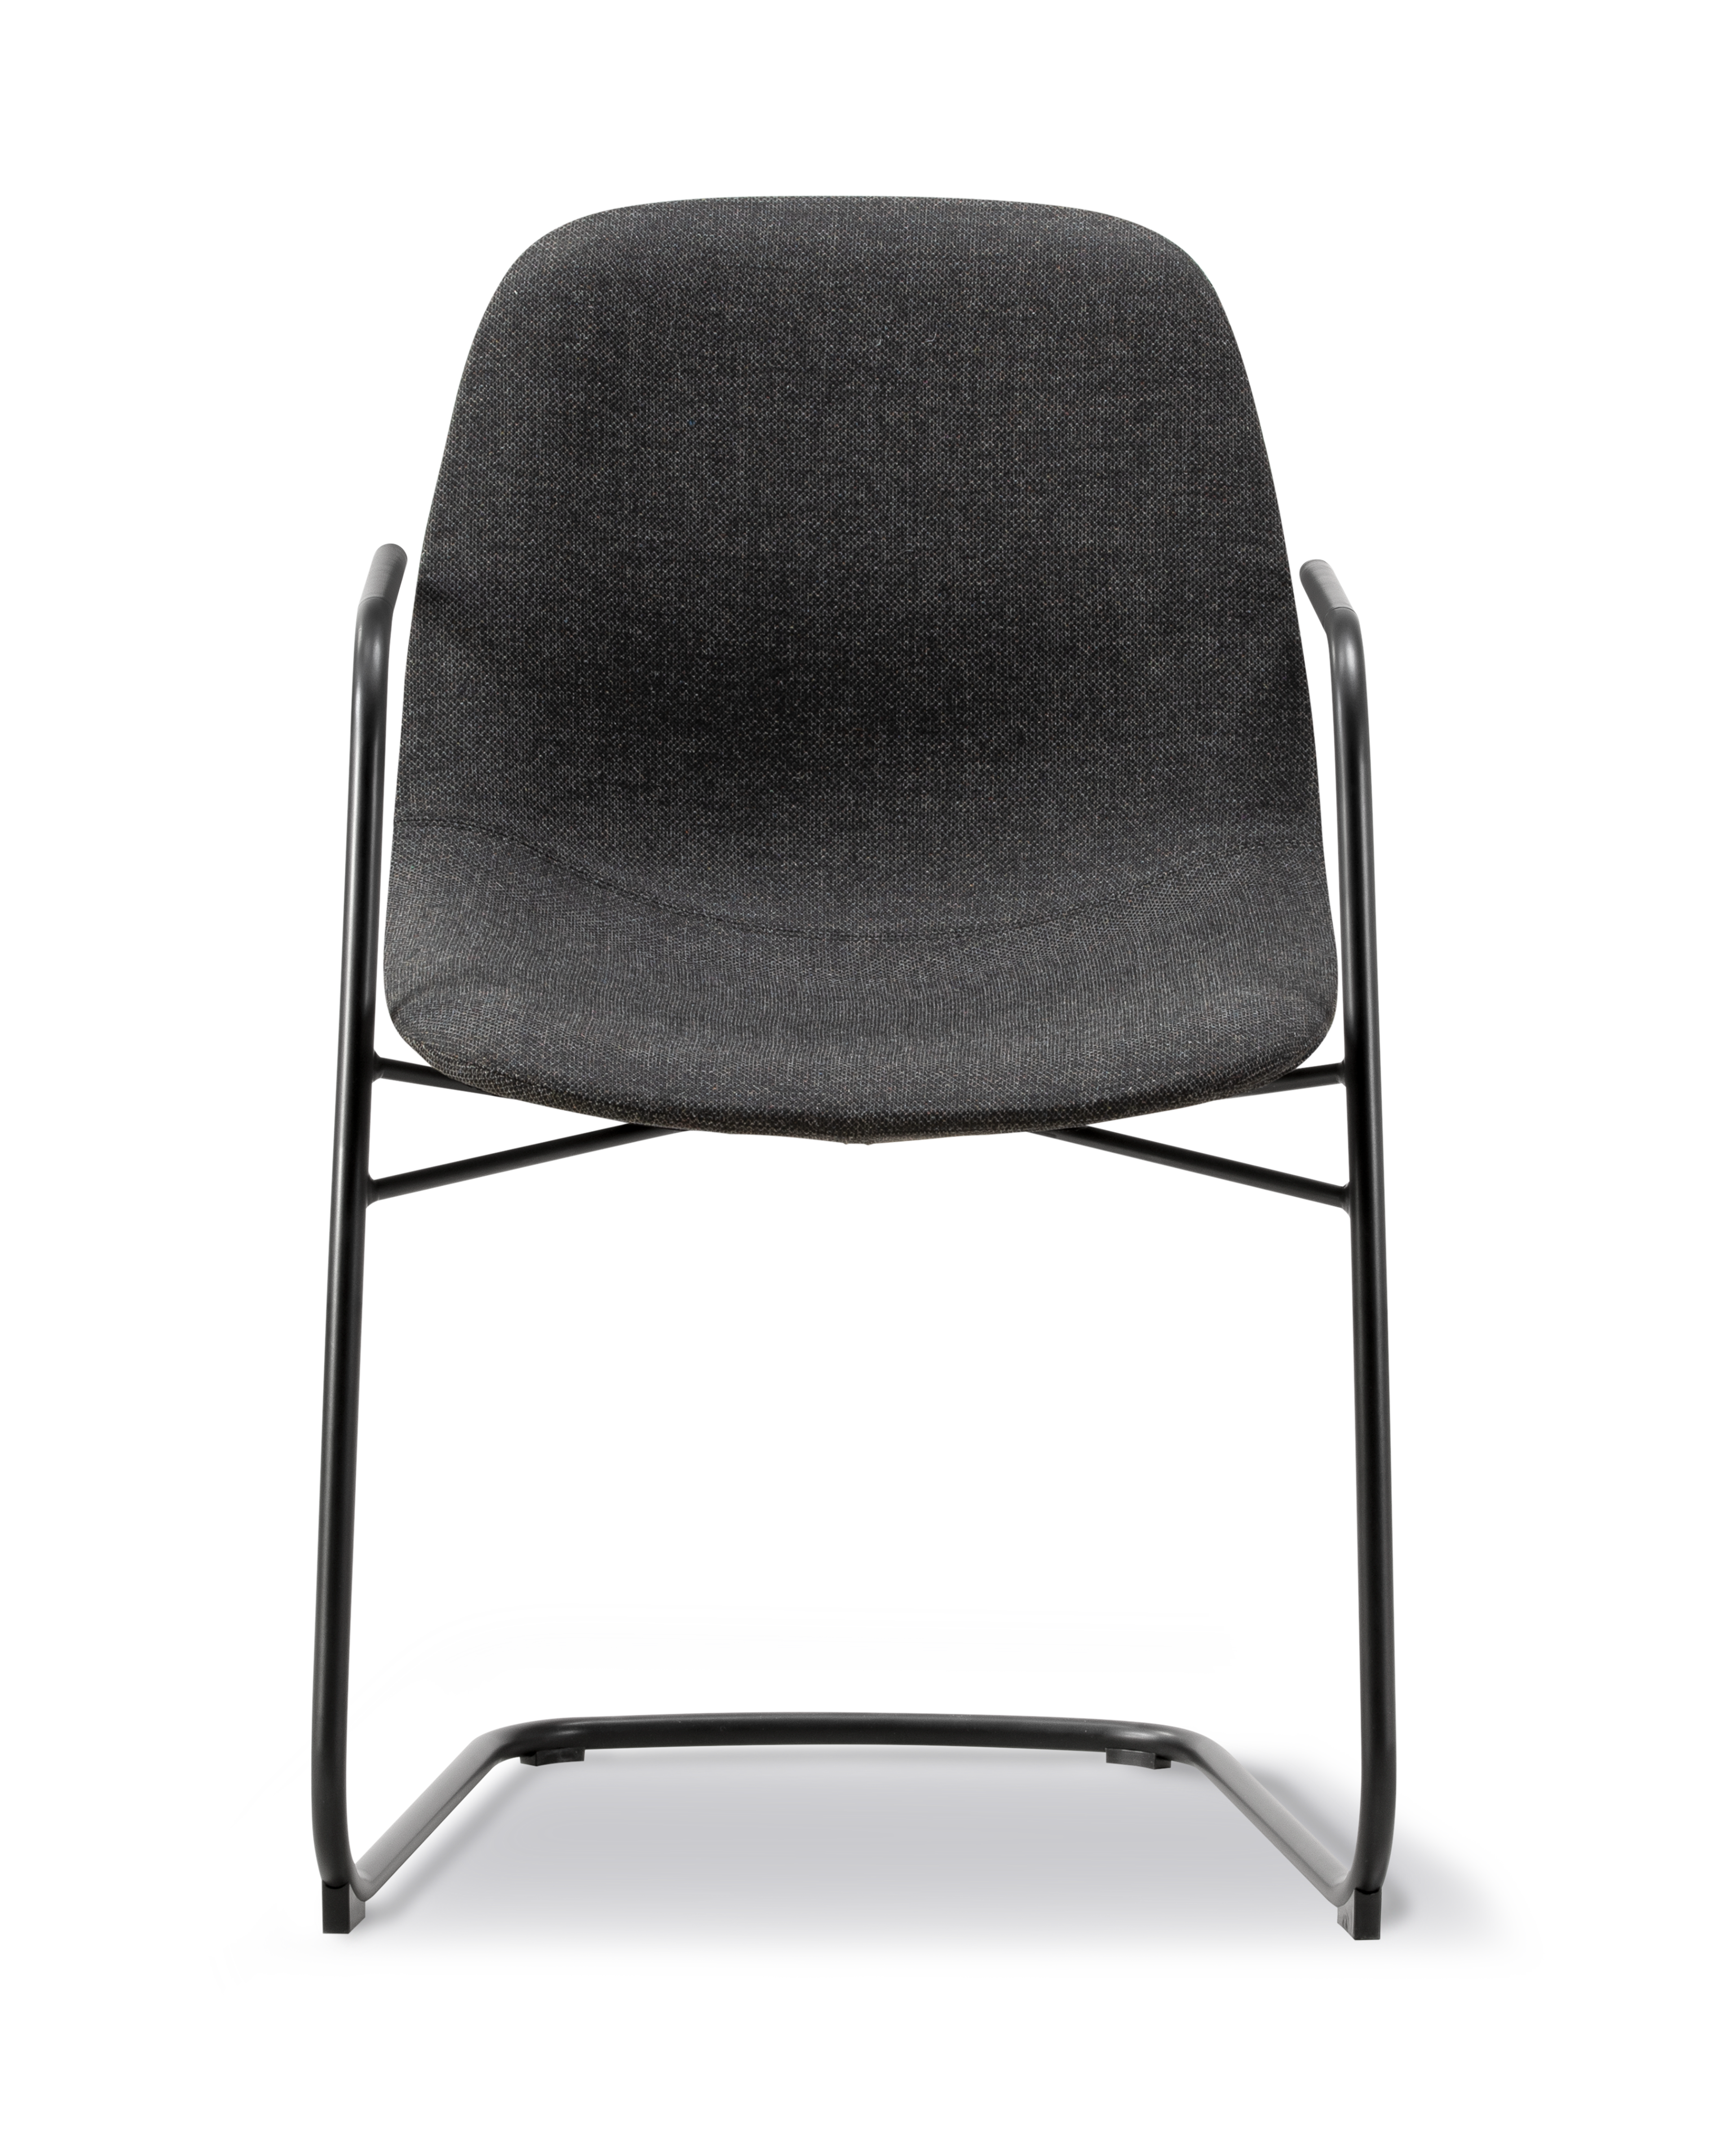 Eyes Cantilever Chair - Re-Wool 198 / Leather 98 Max Piping / Black steel